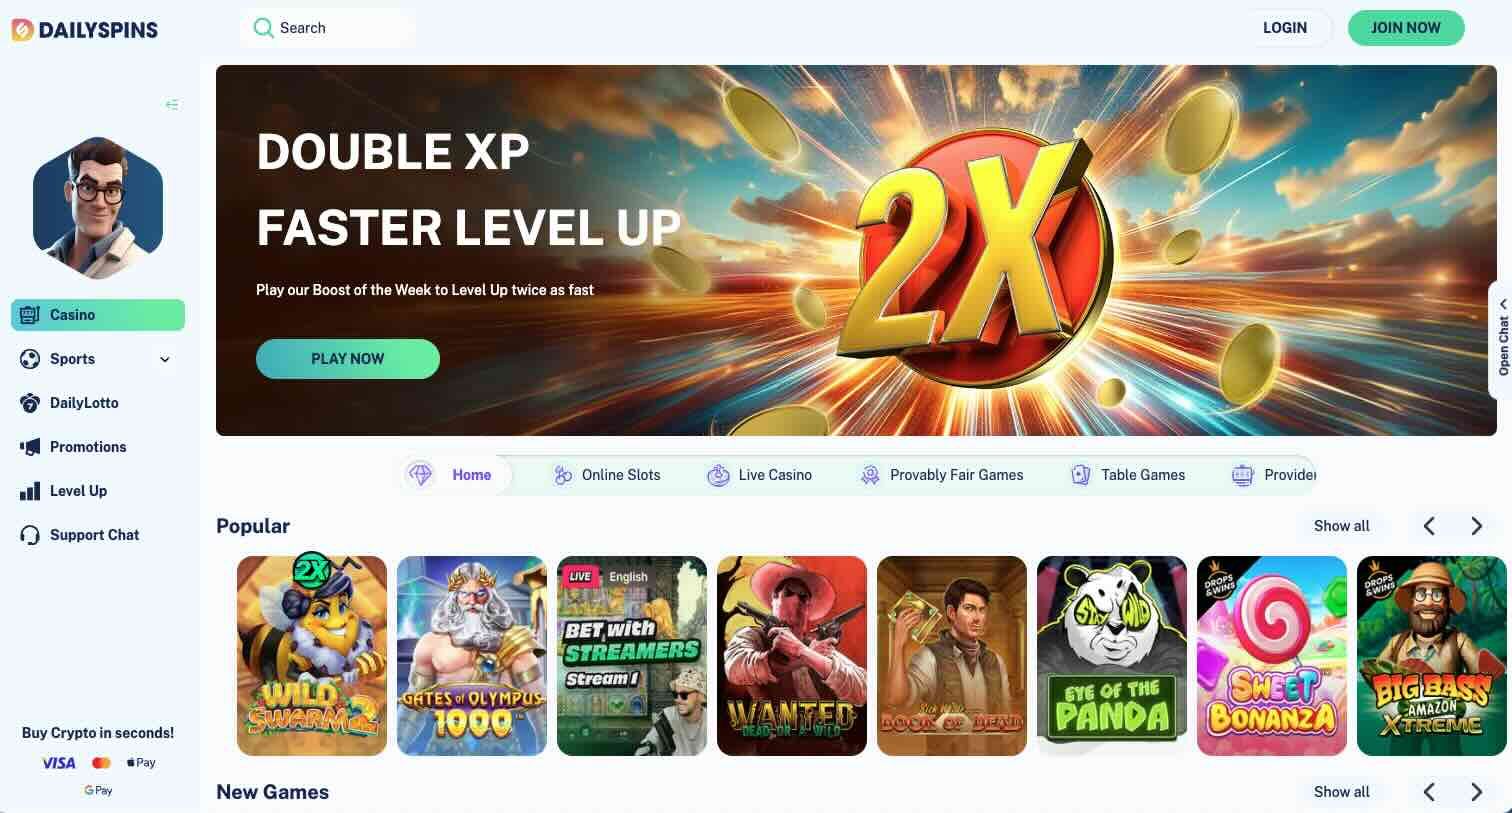 Main Page of Dailyspins Casino Site